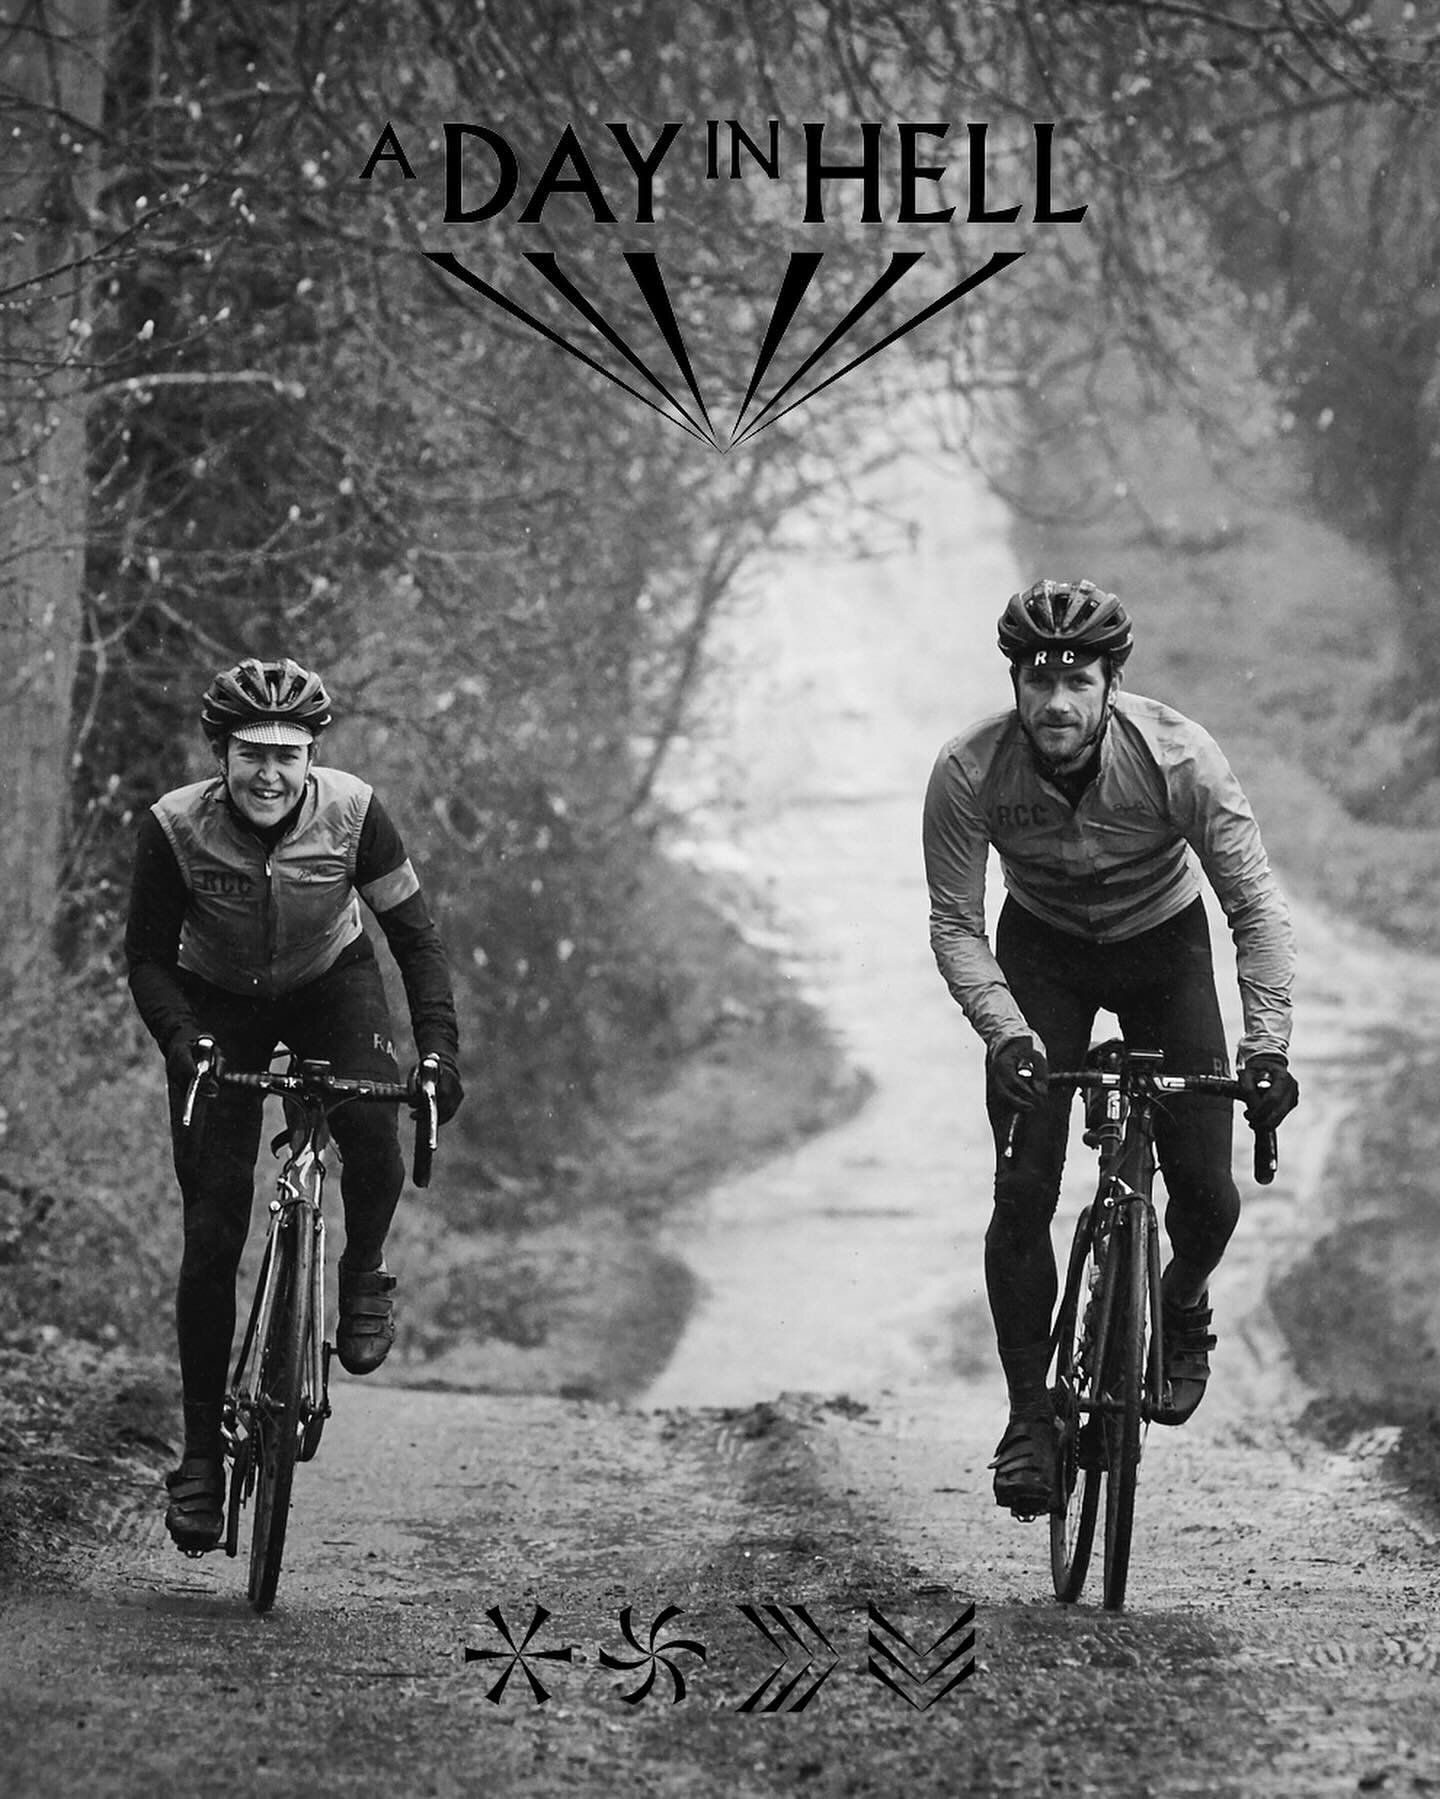 Excited to host a Day in Hell with our friends at Rapha here in Katonah. An ode to the last great madness of cycling, A Day in Hell challenges you to take on your toughest backroads and bridleways, in our homage to the road to Roubaix.

Join Rapha at